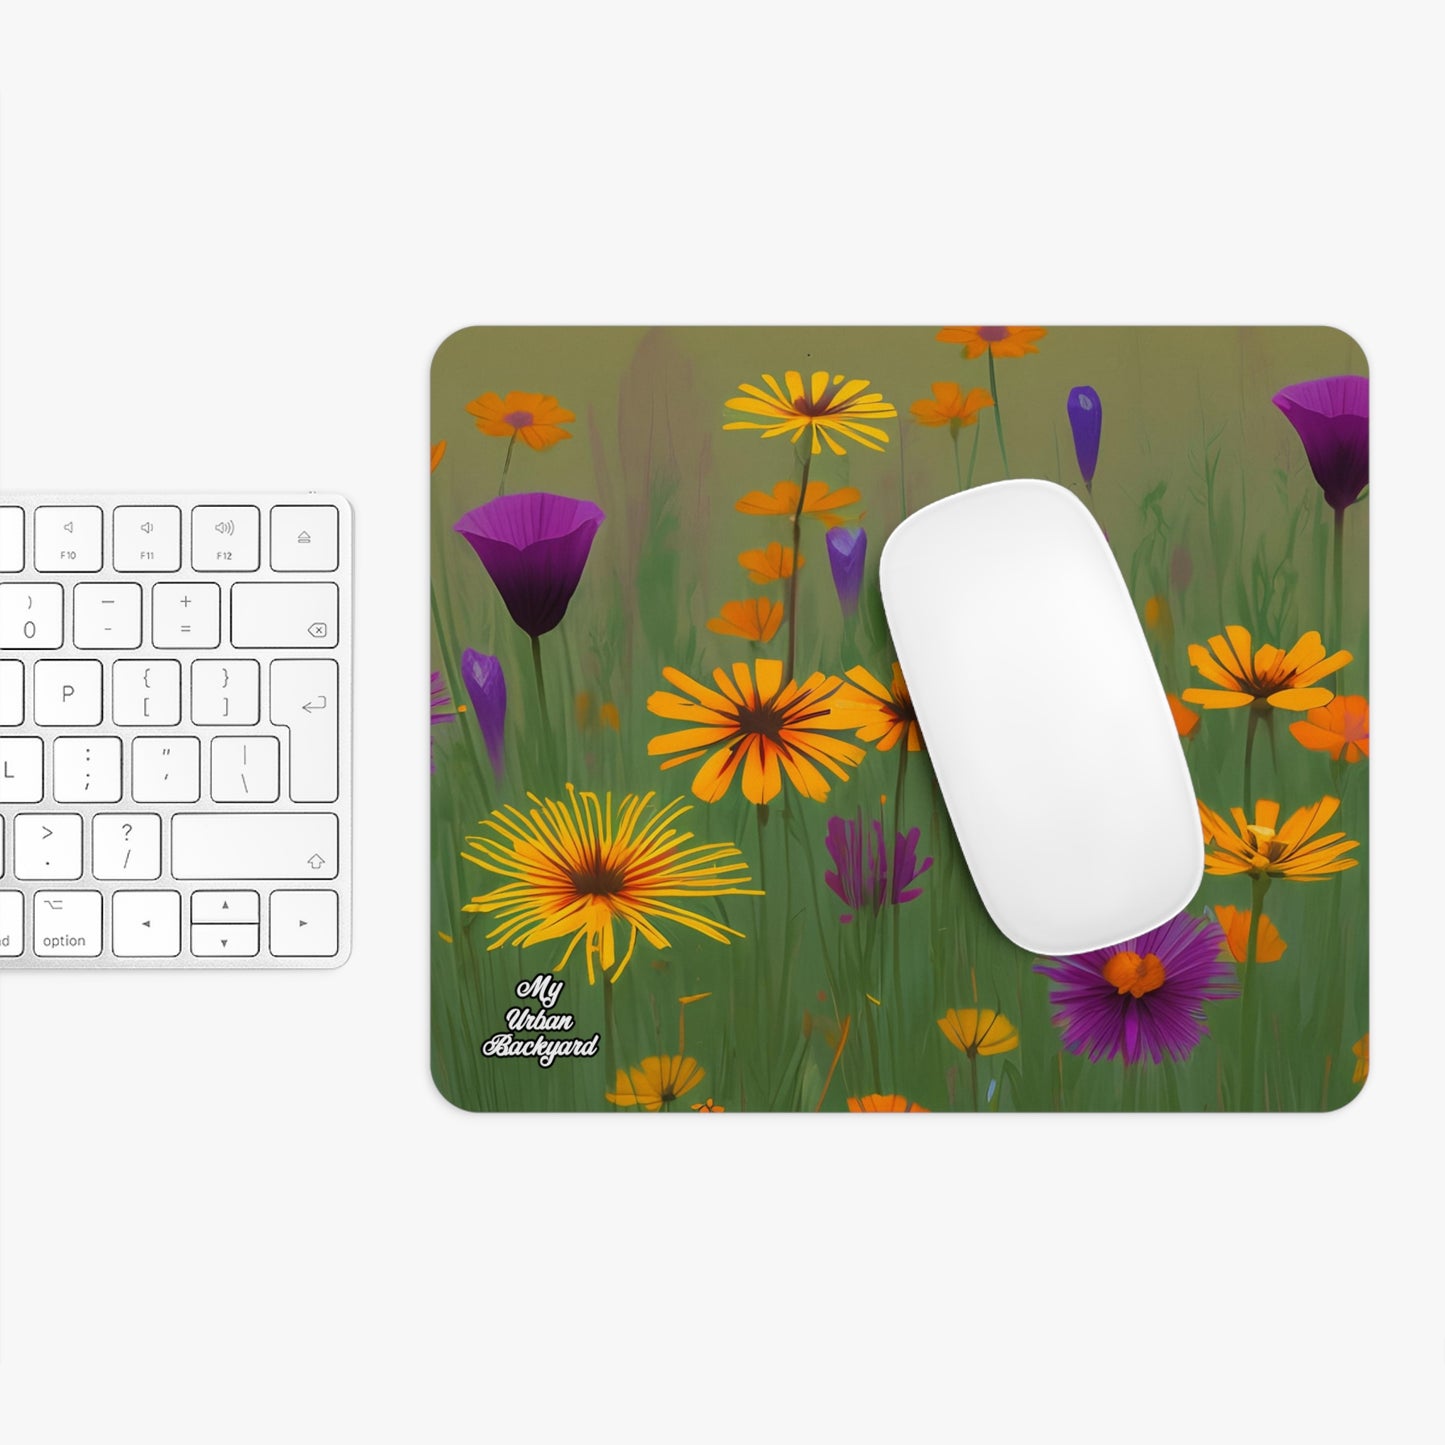 Computer Mouse Pad with Non-slip rubber bottom for Home or Office - Orange and Purple Wildflowers